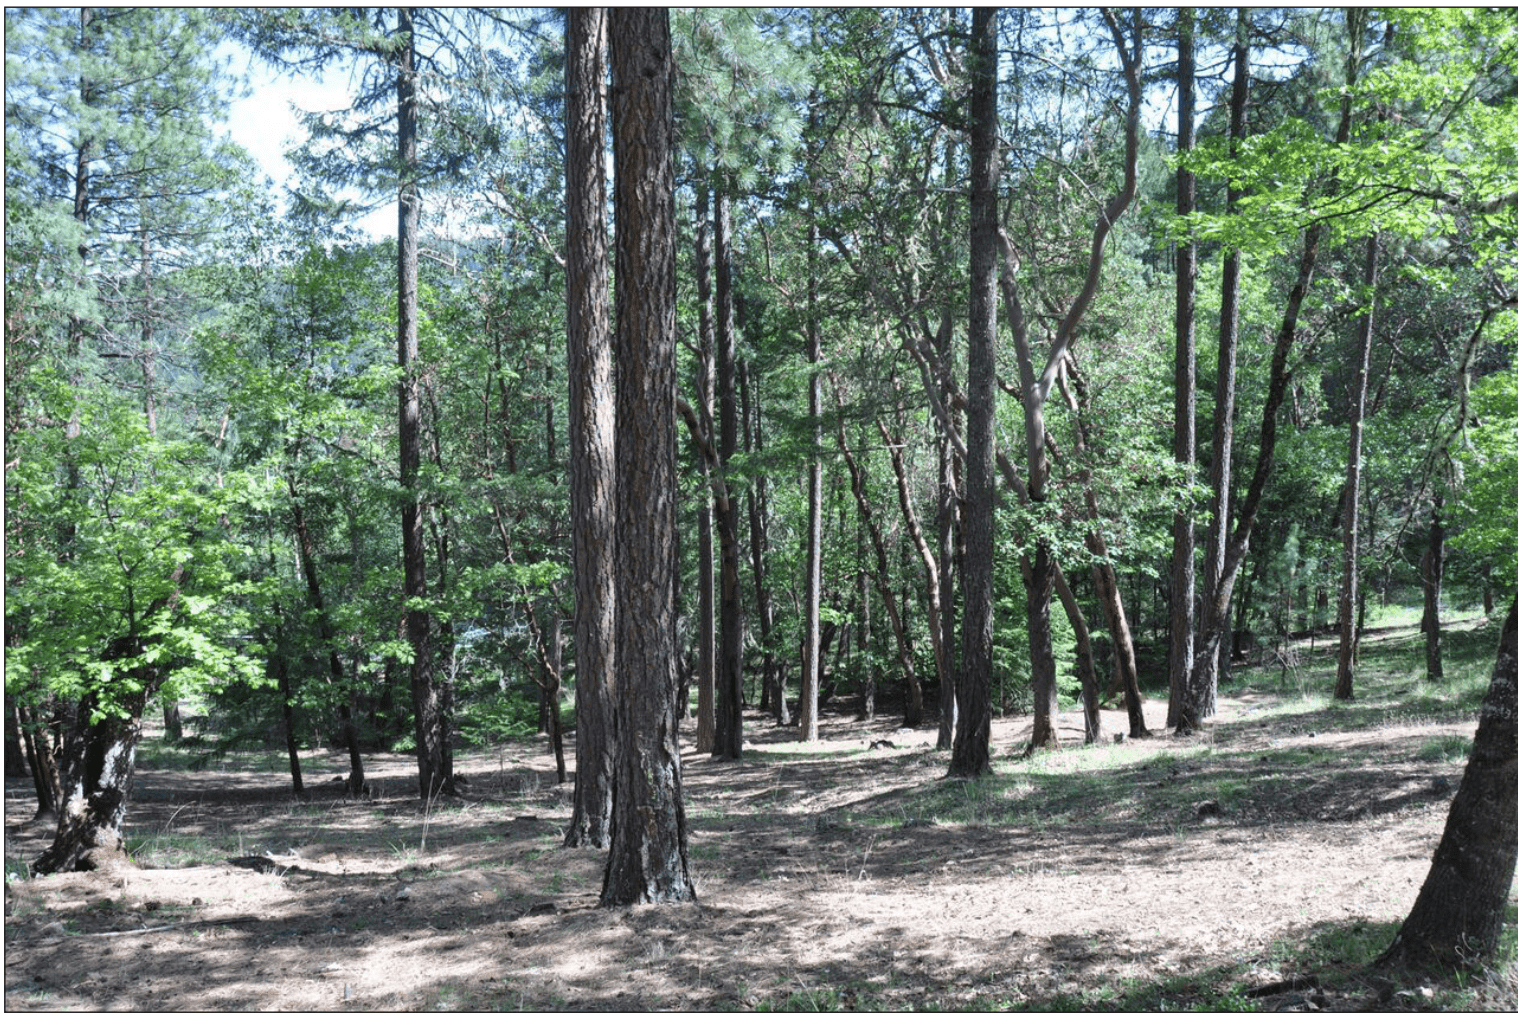 cleared area of understory in forest with tall trees remaining